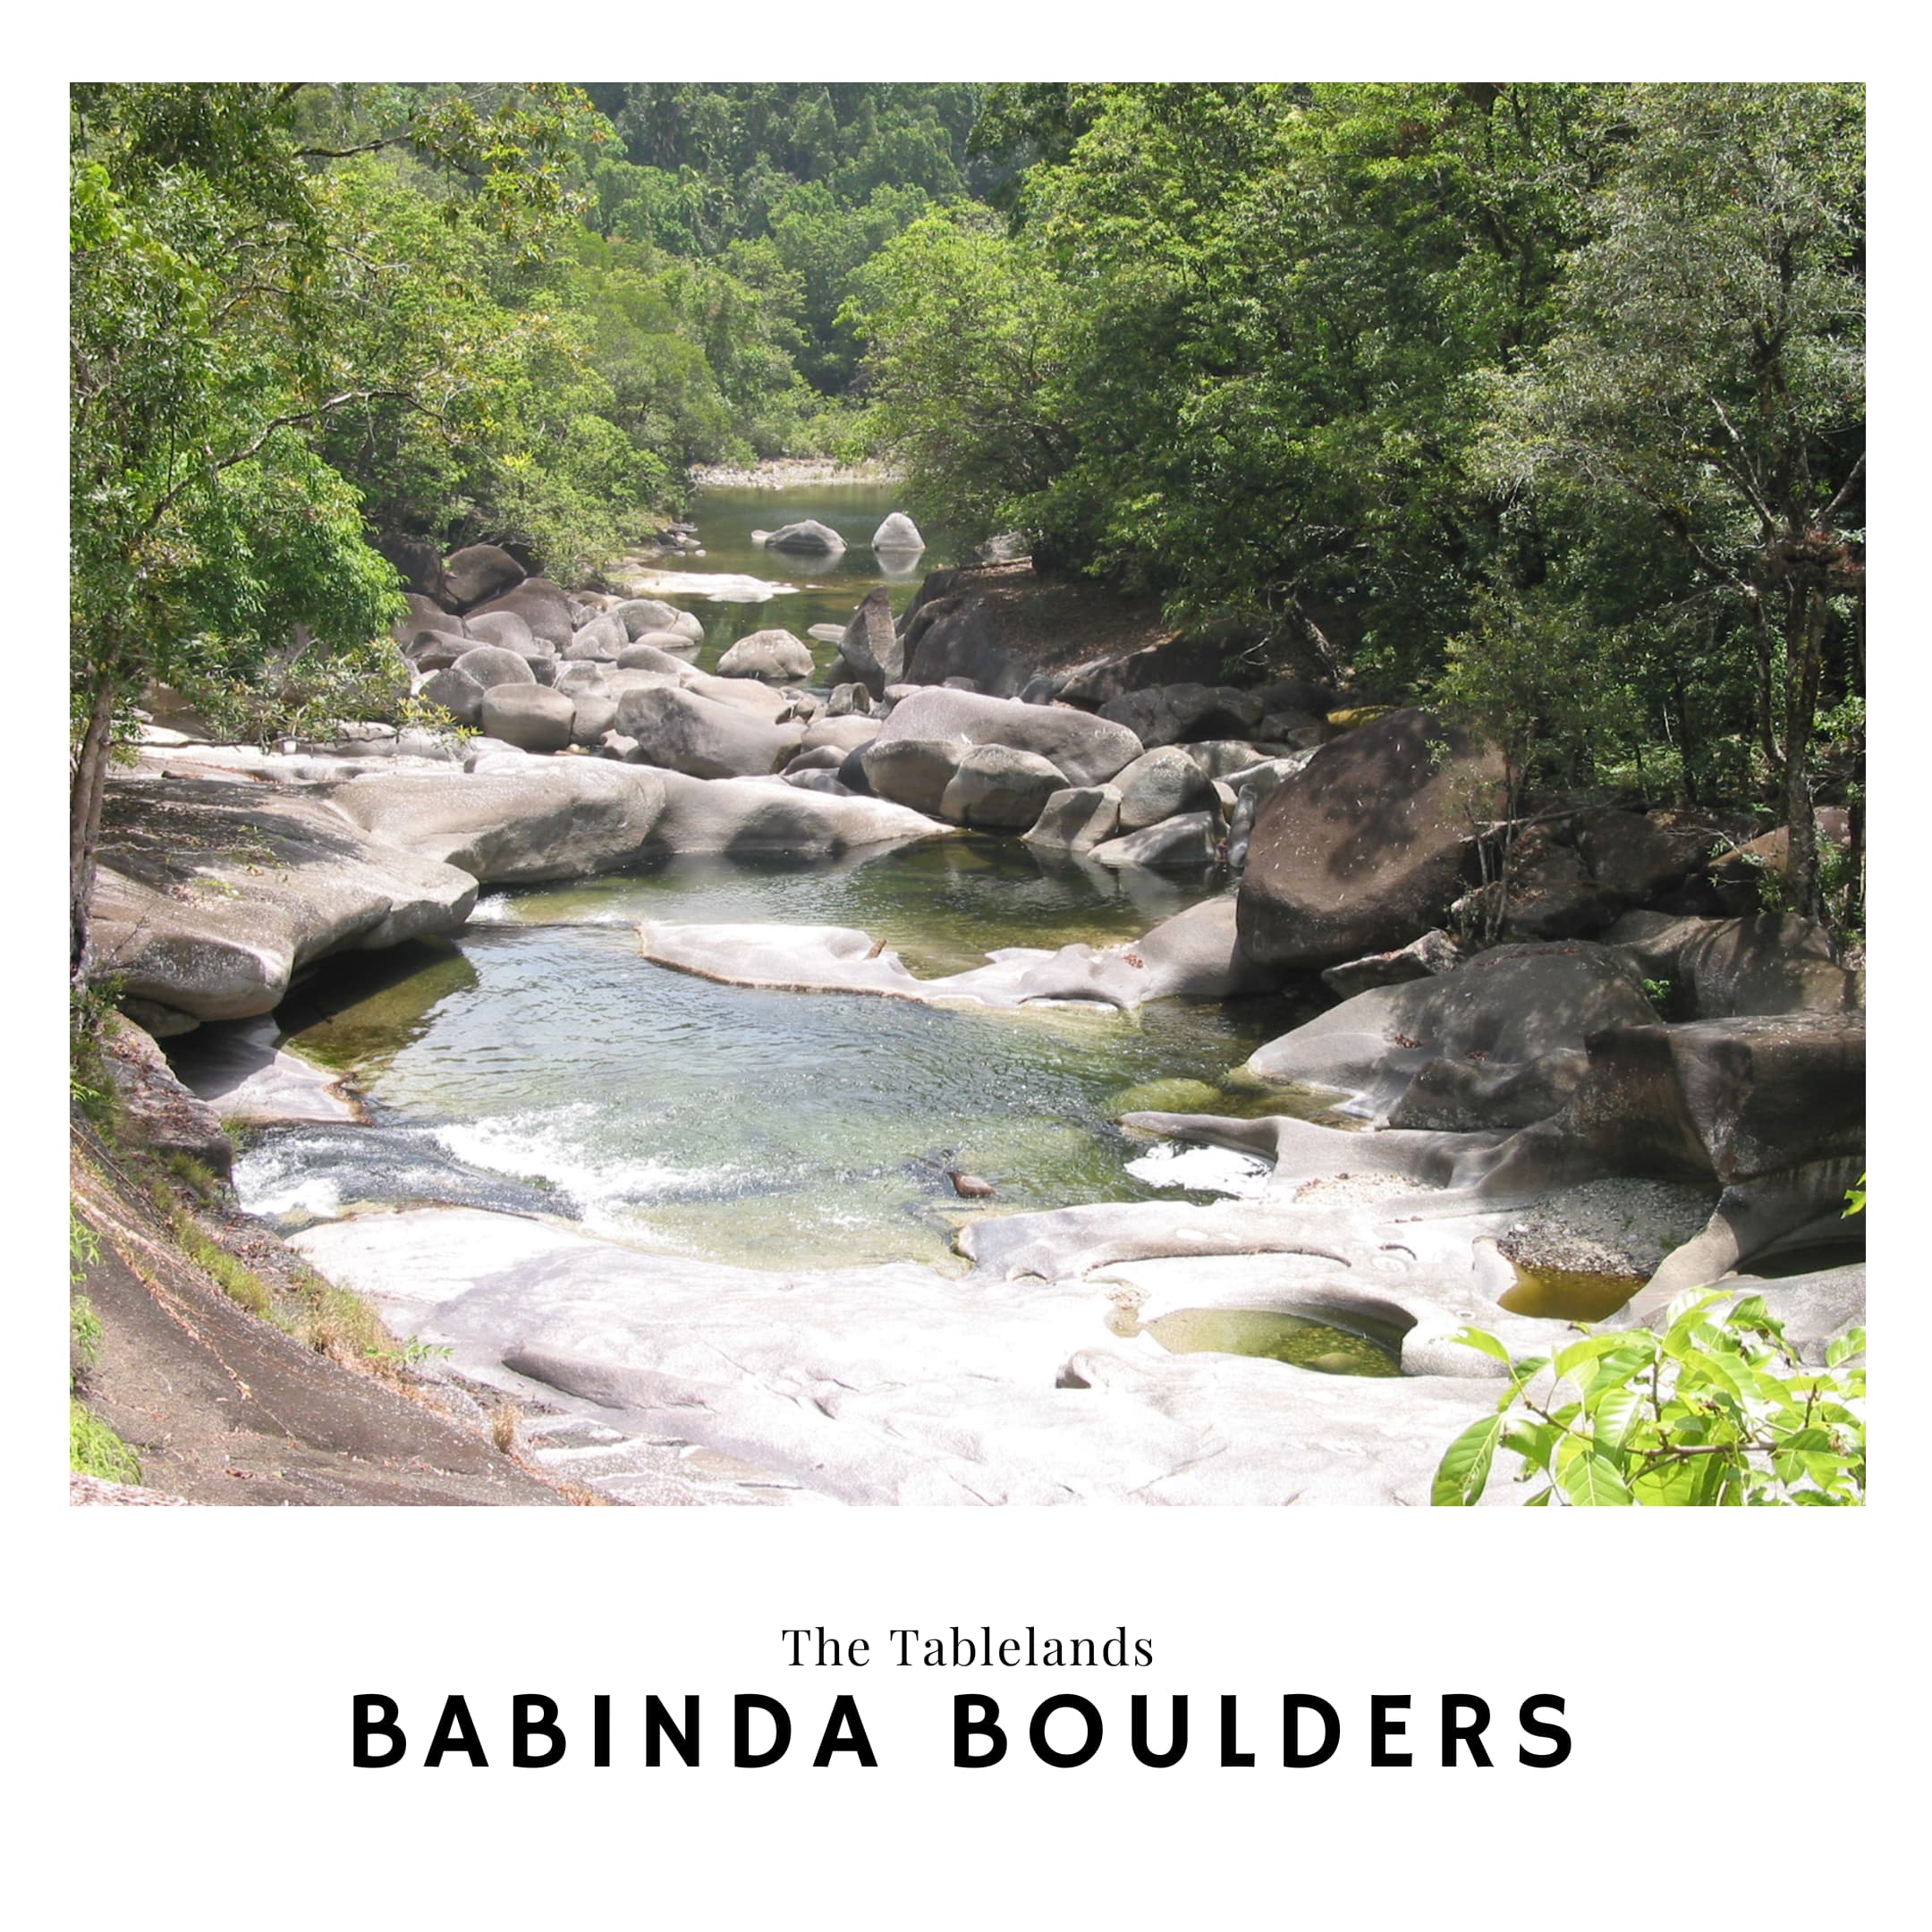 Link to the Babinda Boulders travel guide in the Tablelands australia